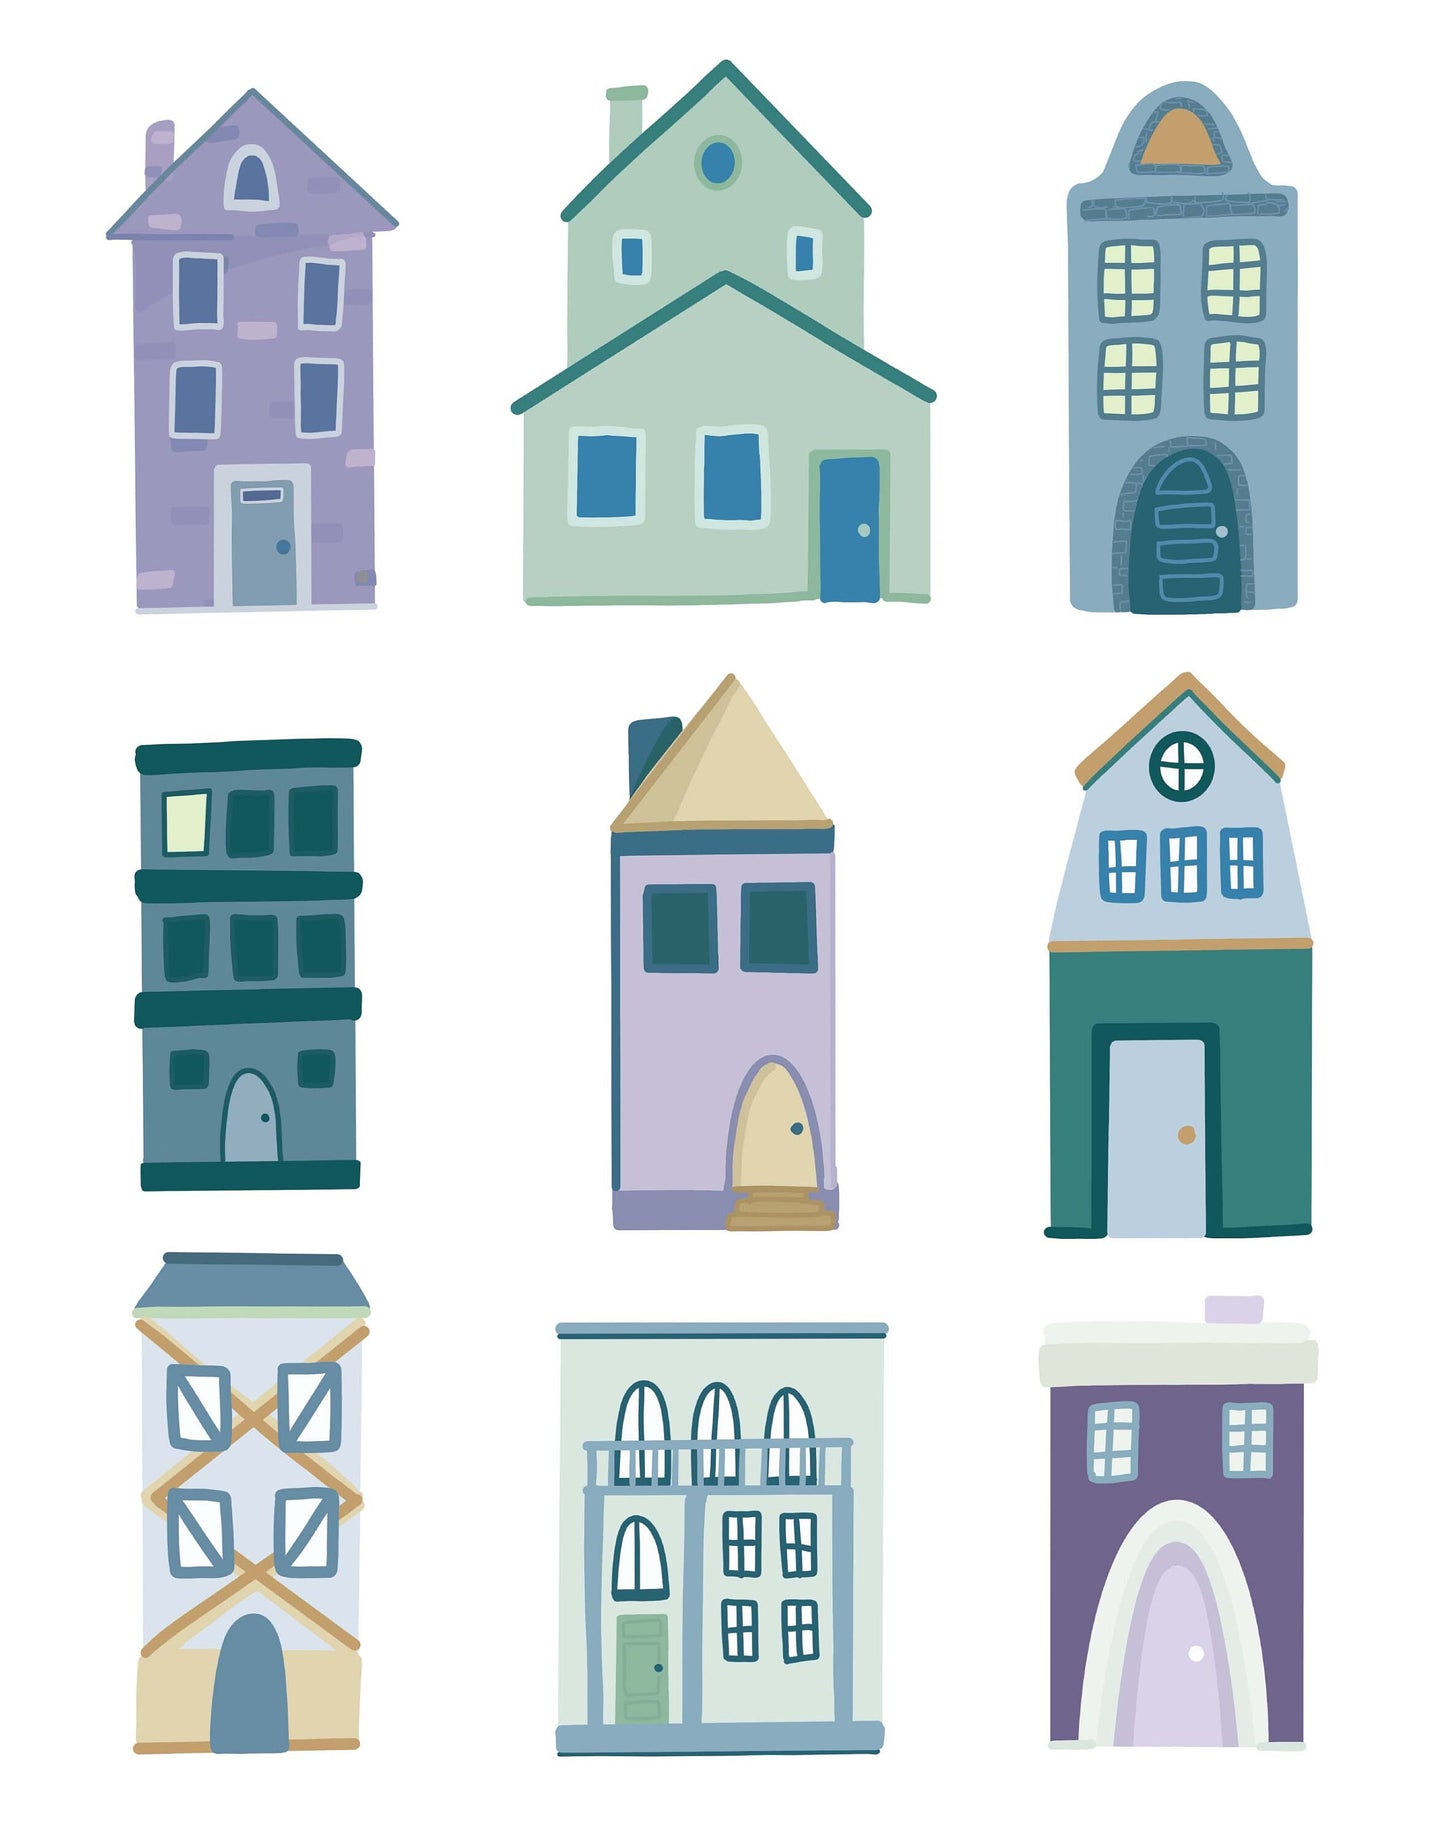 8x10 Houses Mint and Purple - Unframed